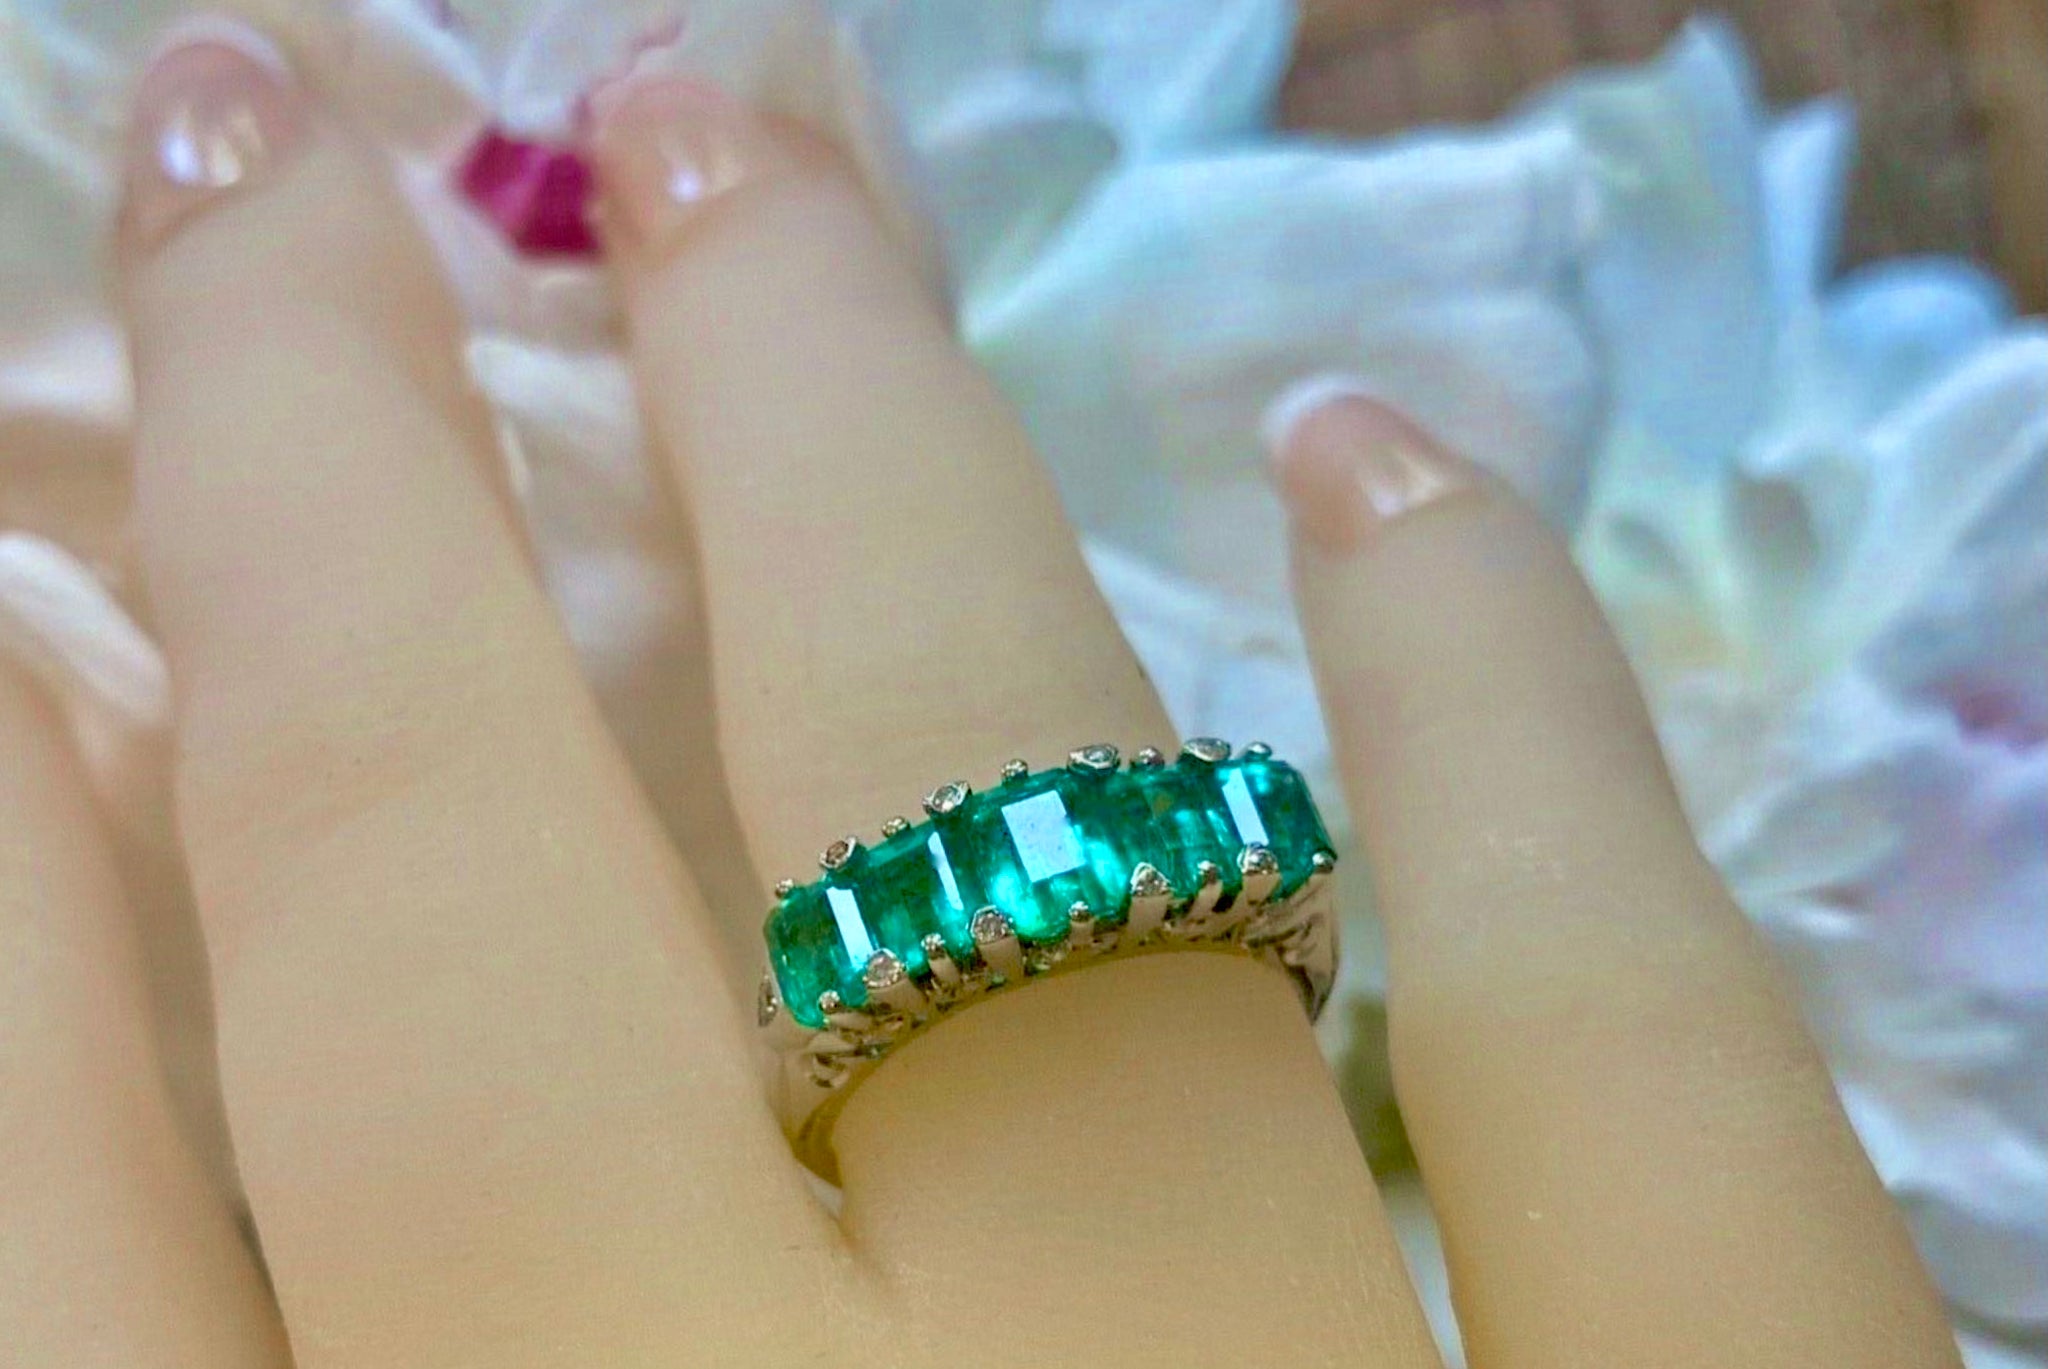 Five Stone Colombian Emerald Victorian Style Ring 18K